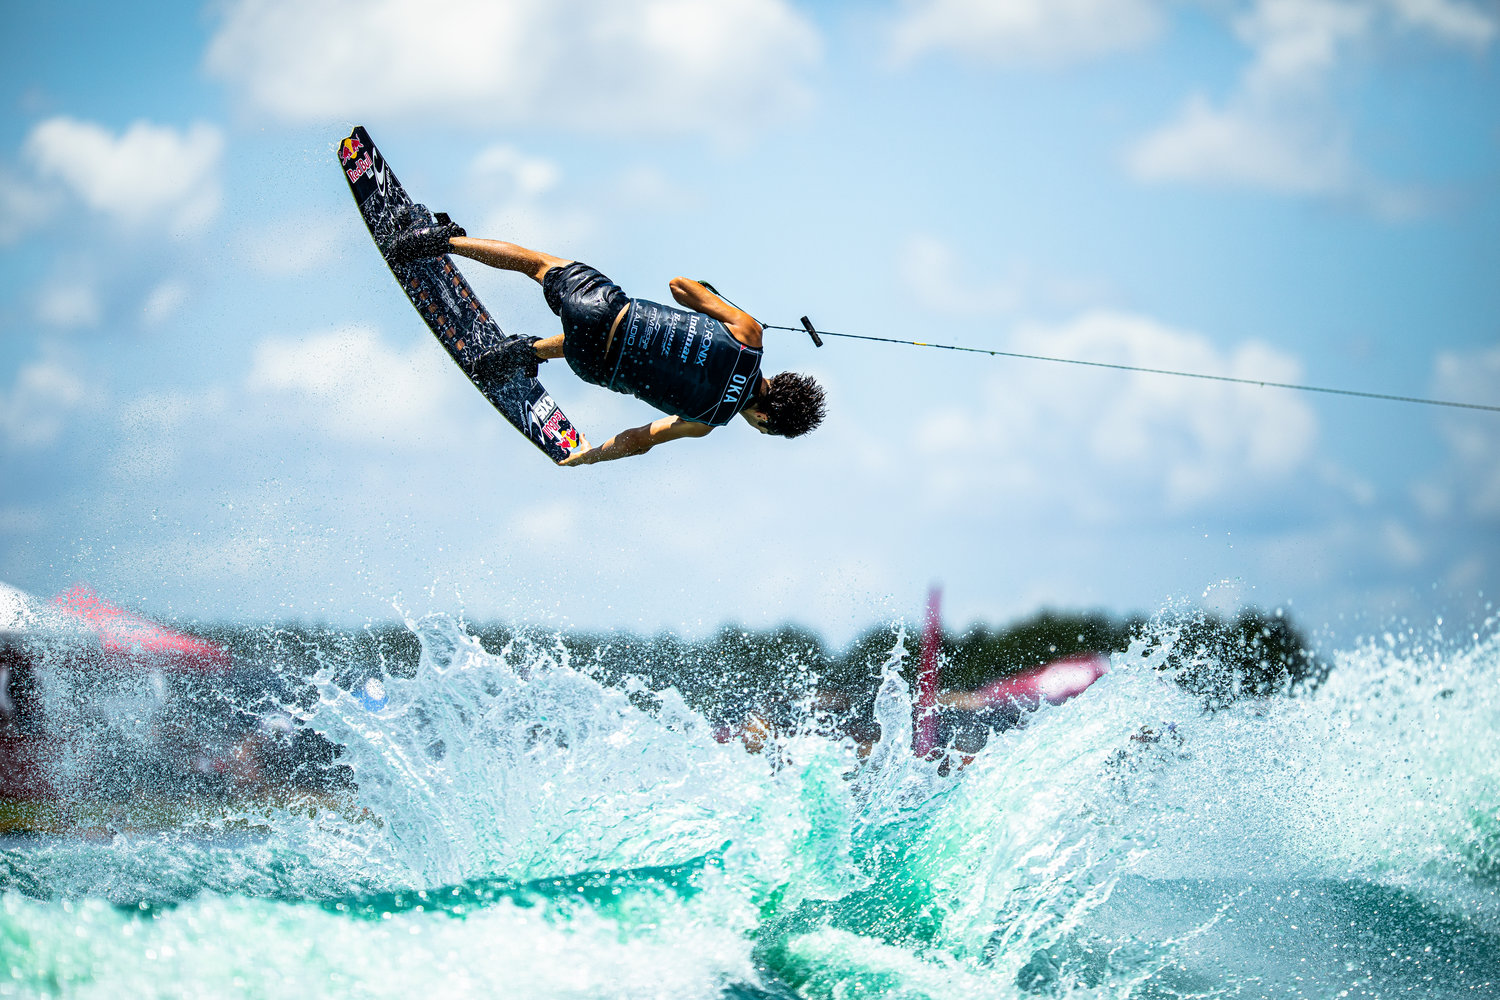 The 2021 Pro Wakeboard, Pro Wakesurf and Junior Pro Wakeboard tours were held in Katy on June 11-12. In pro men wakeboarding, Sam Brown ran away with the finals win with a score of 90. In pro men wakesurfing, Sean Silveira took first with a score of 91.66.